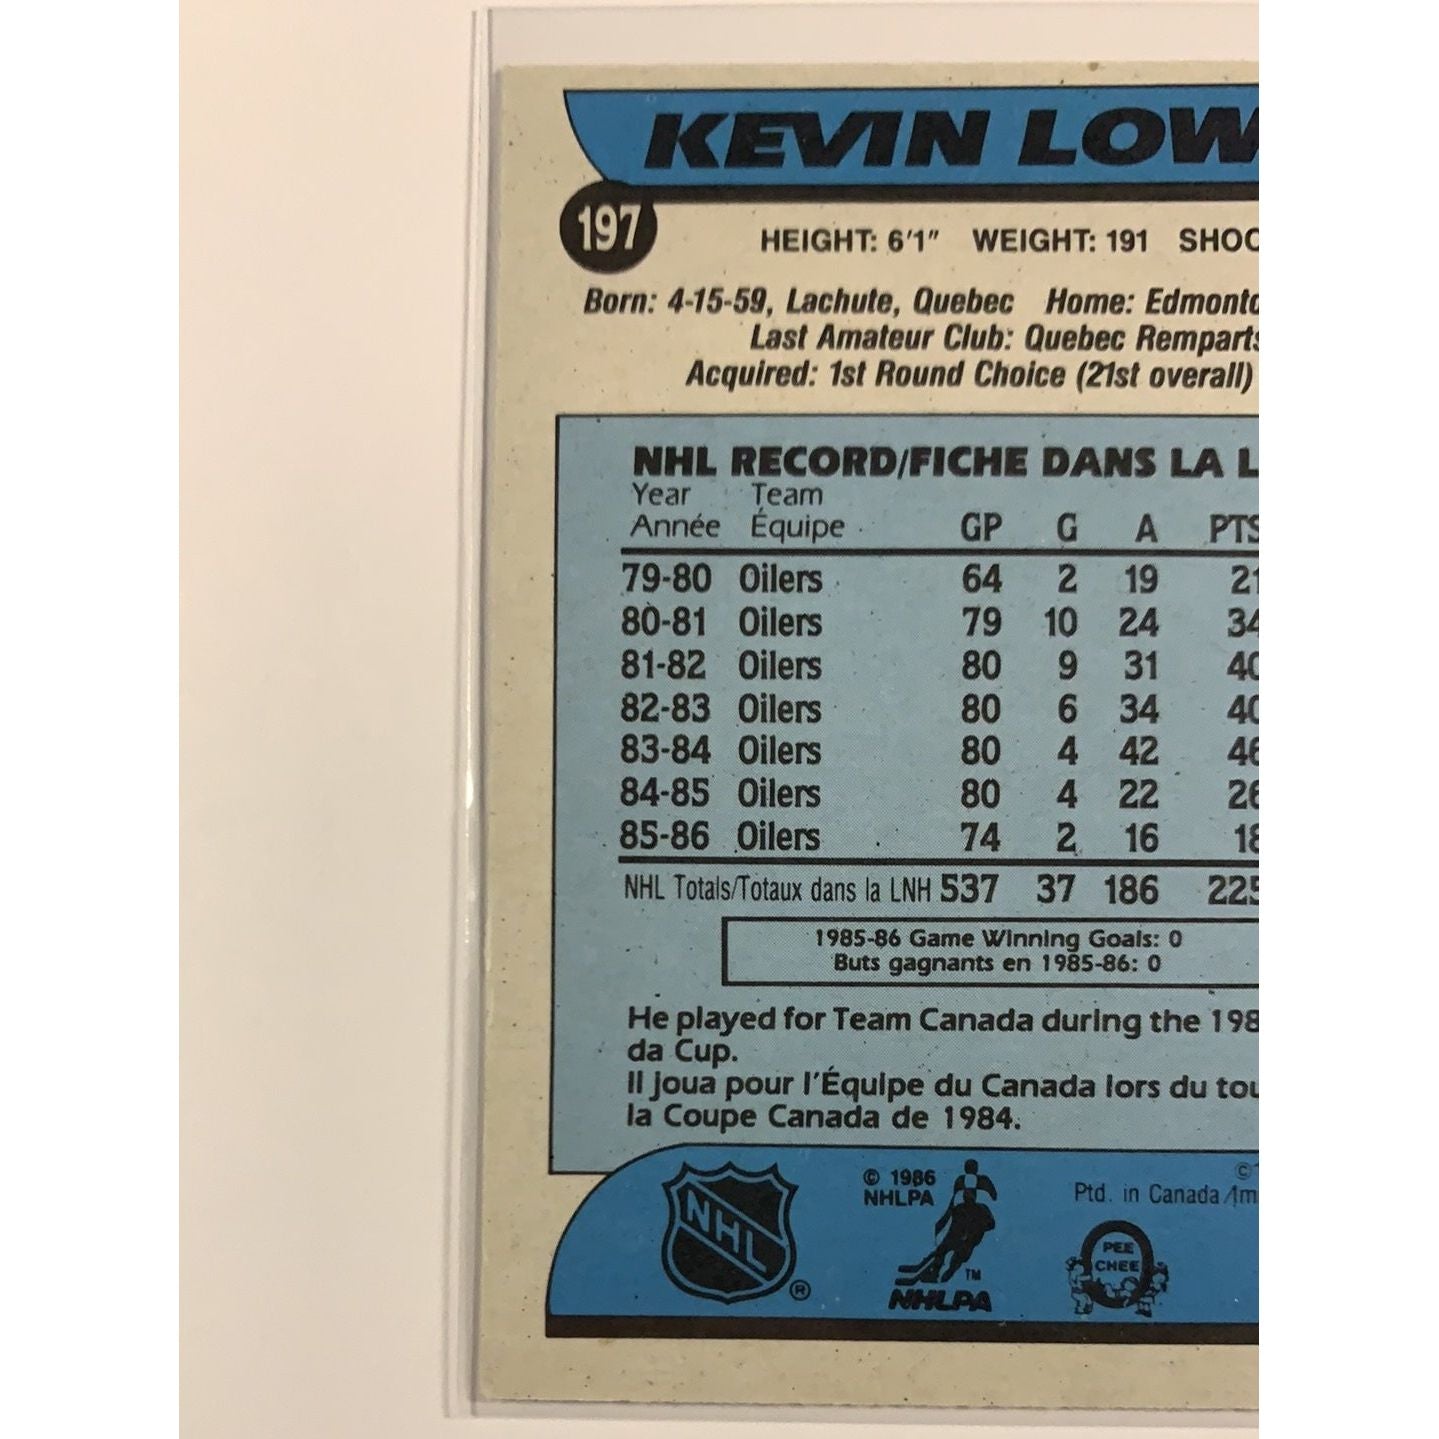  1986-87 O-Pee-Chee Kevin Lowe Base #197  Local Legends Cards & Collectibles